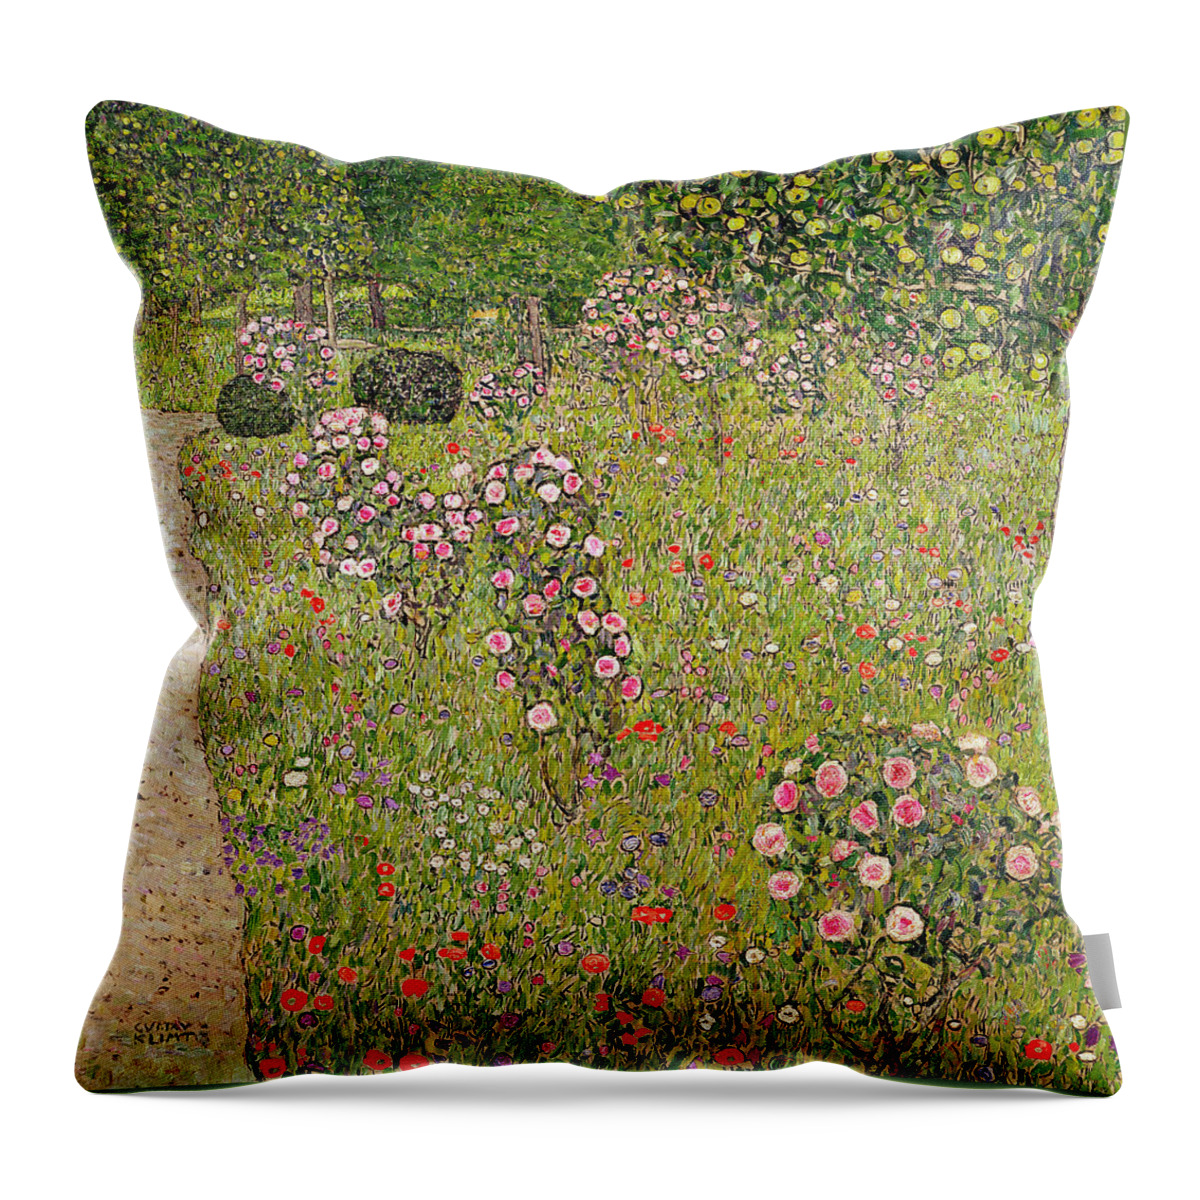 Klimt Throw Pillow featuring the painting Orchard With Roses Obstgarten Mit Rosen by Gustav Klimt